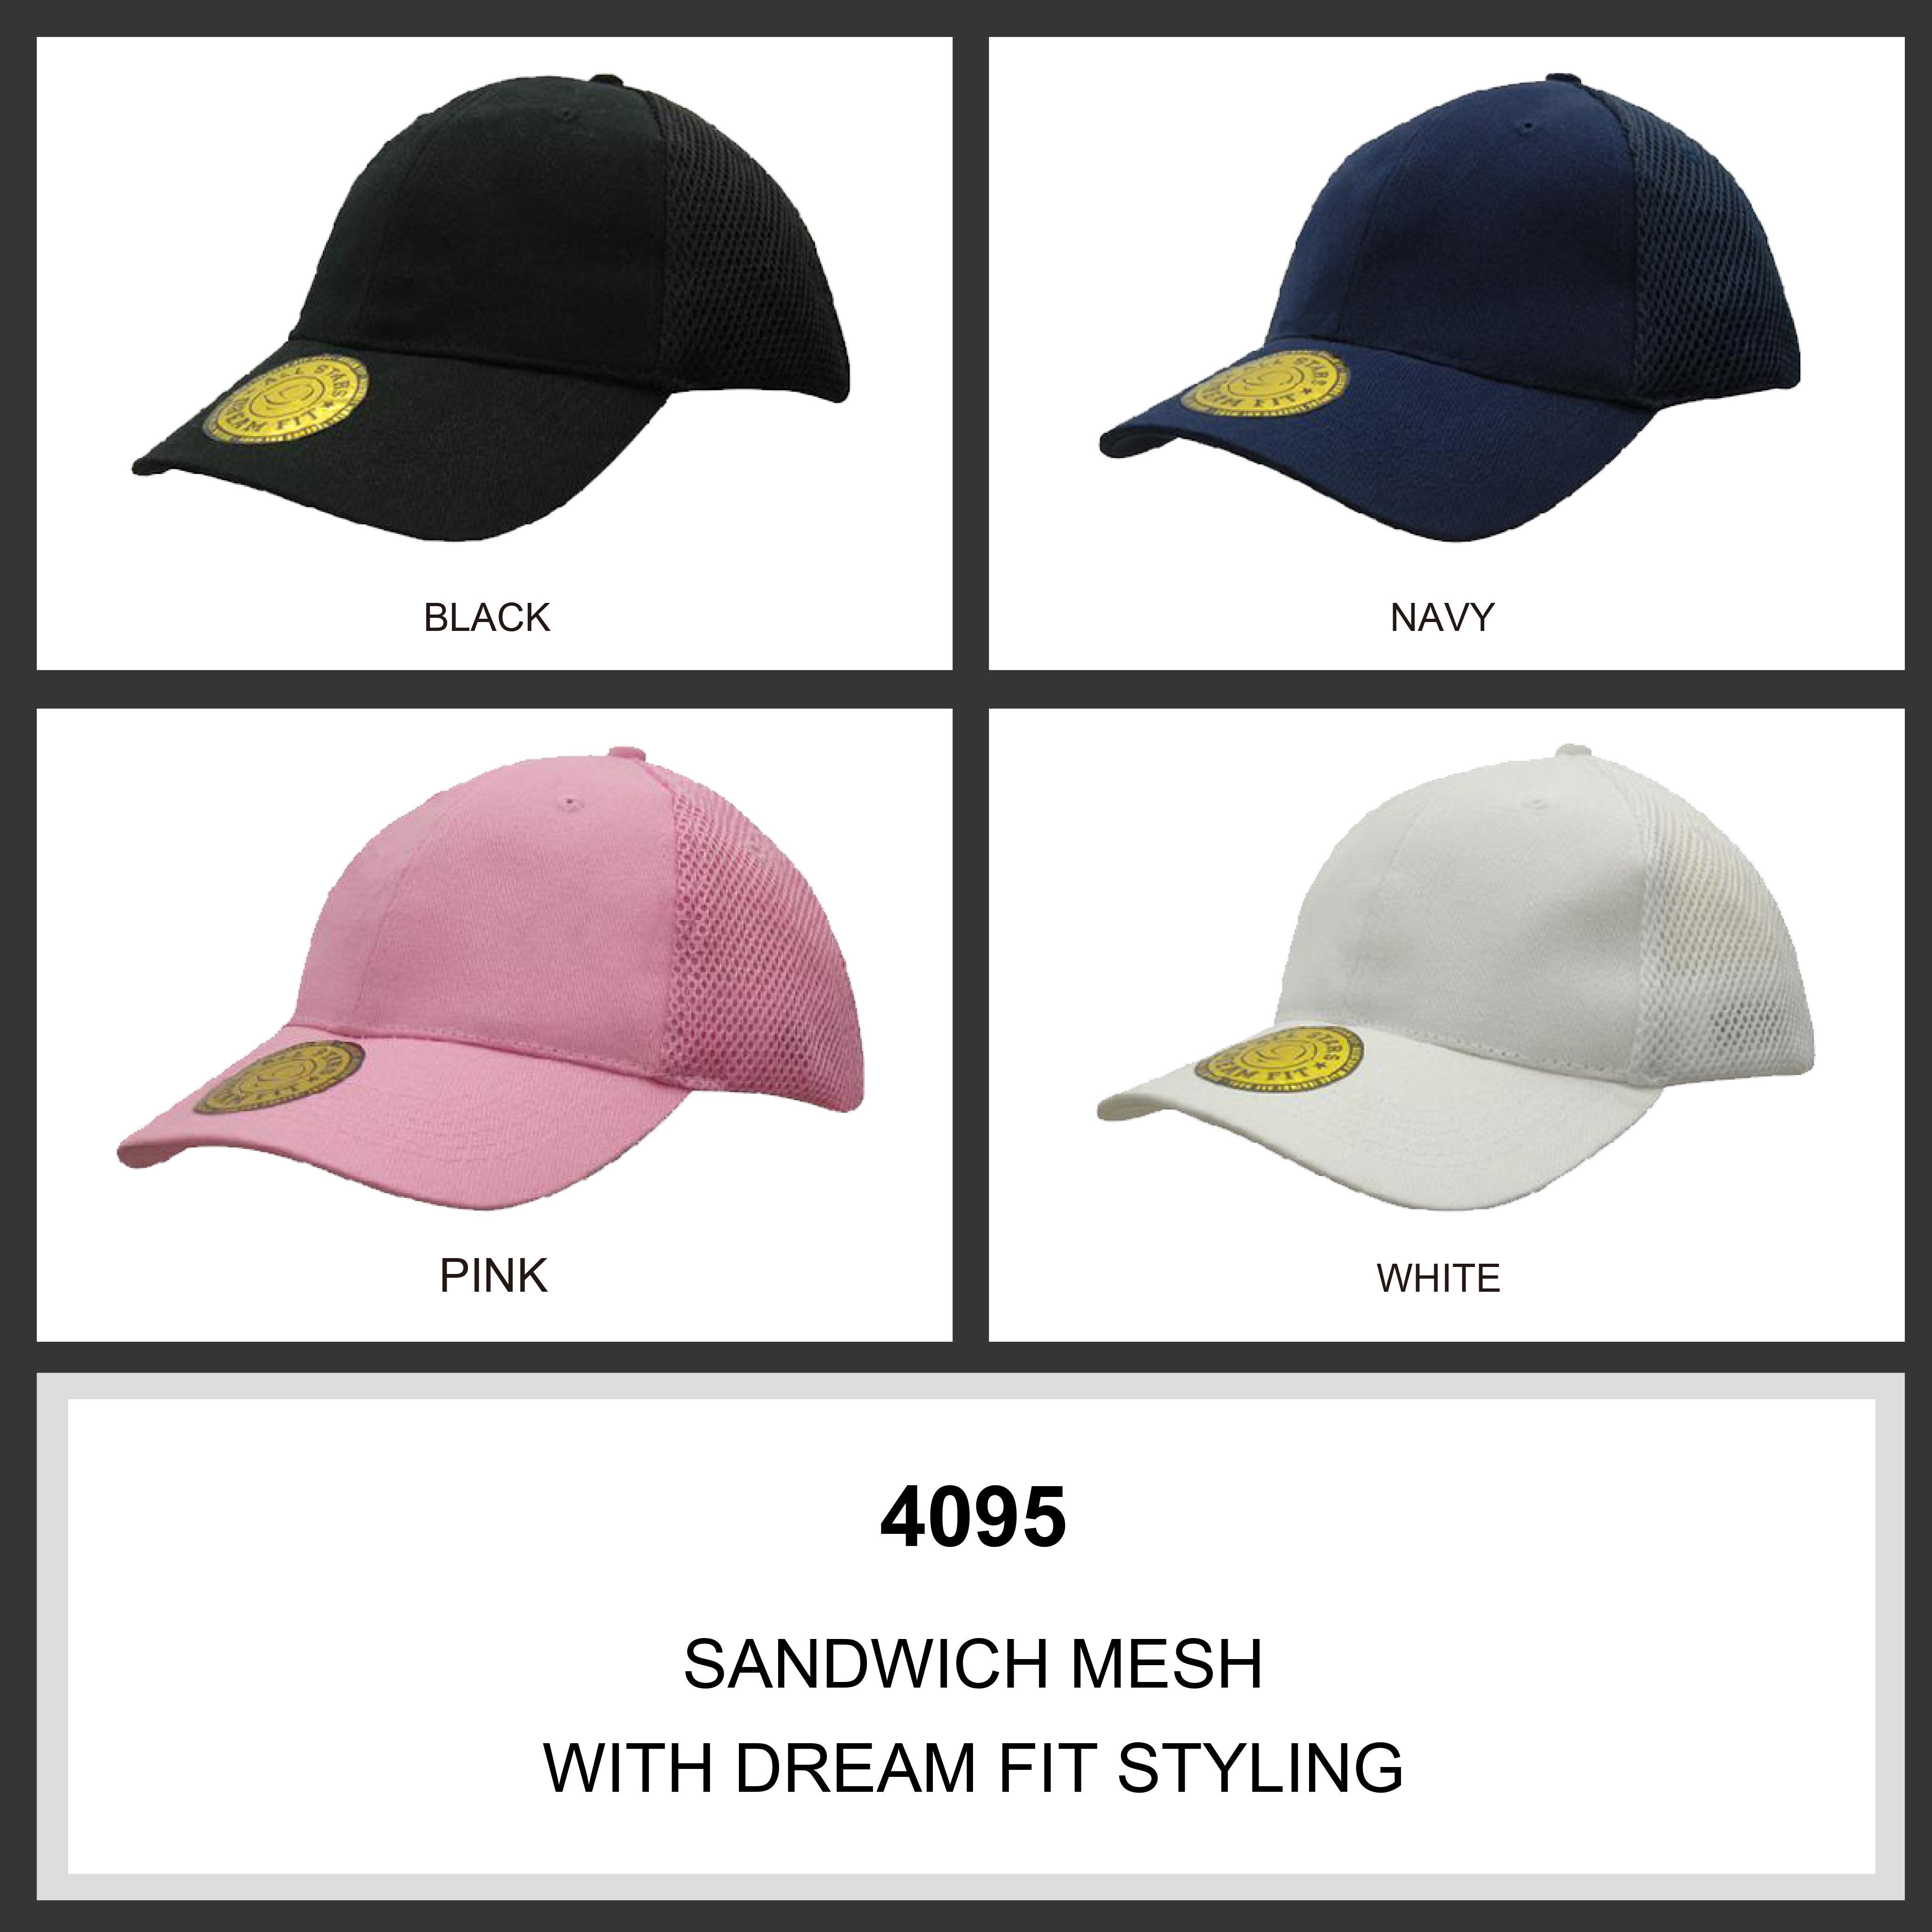 Sandwich Mesh Cap with Dream Fit Styling